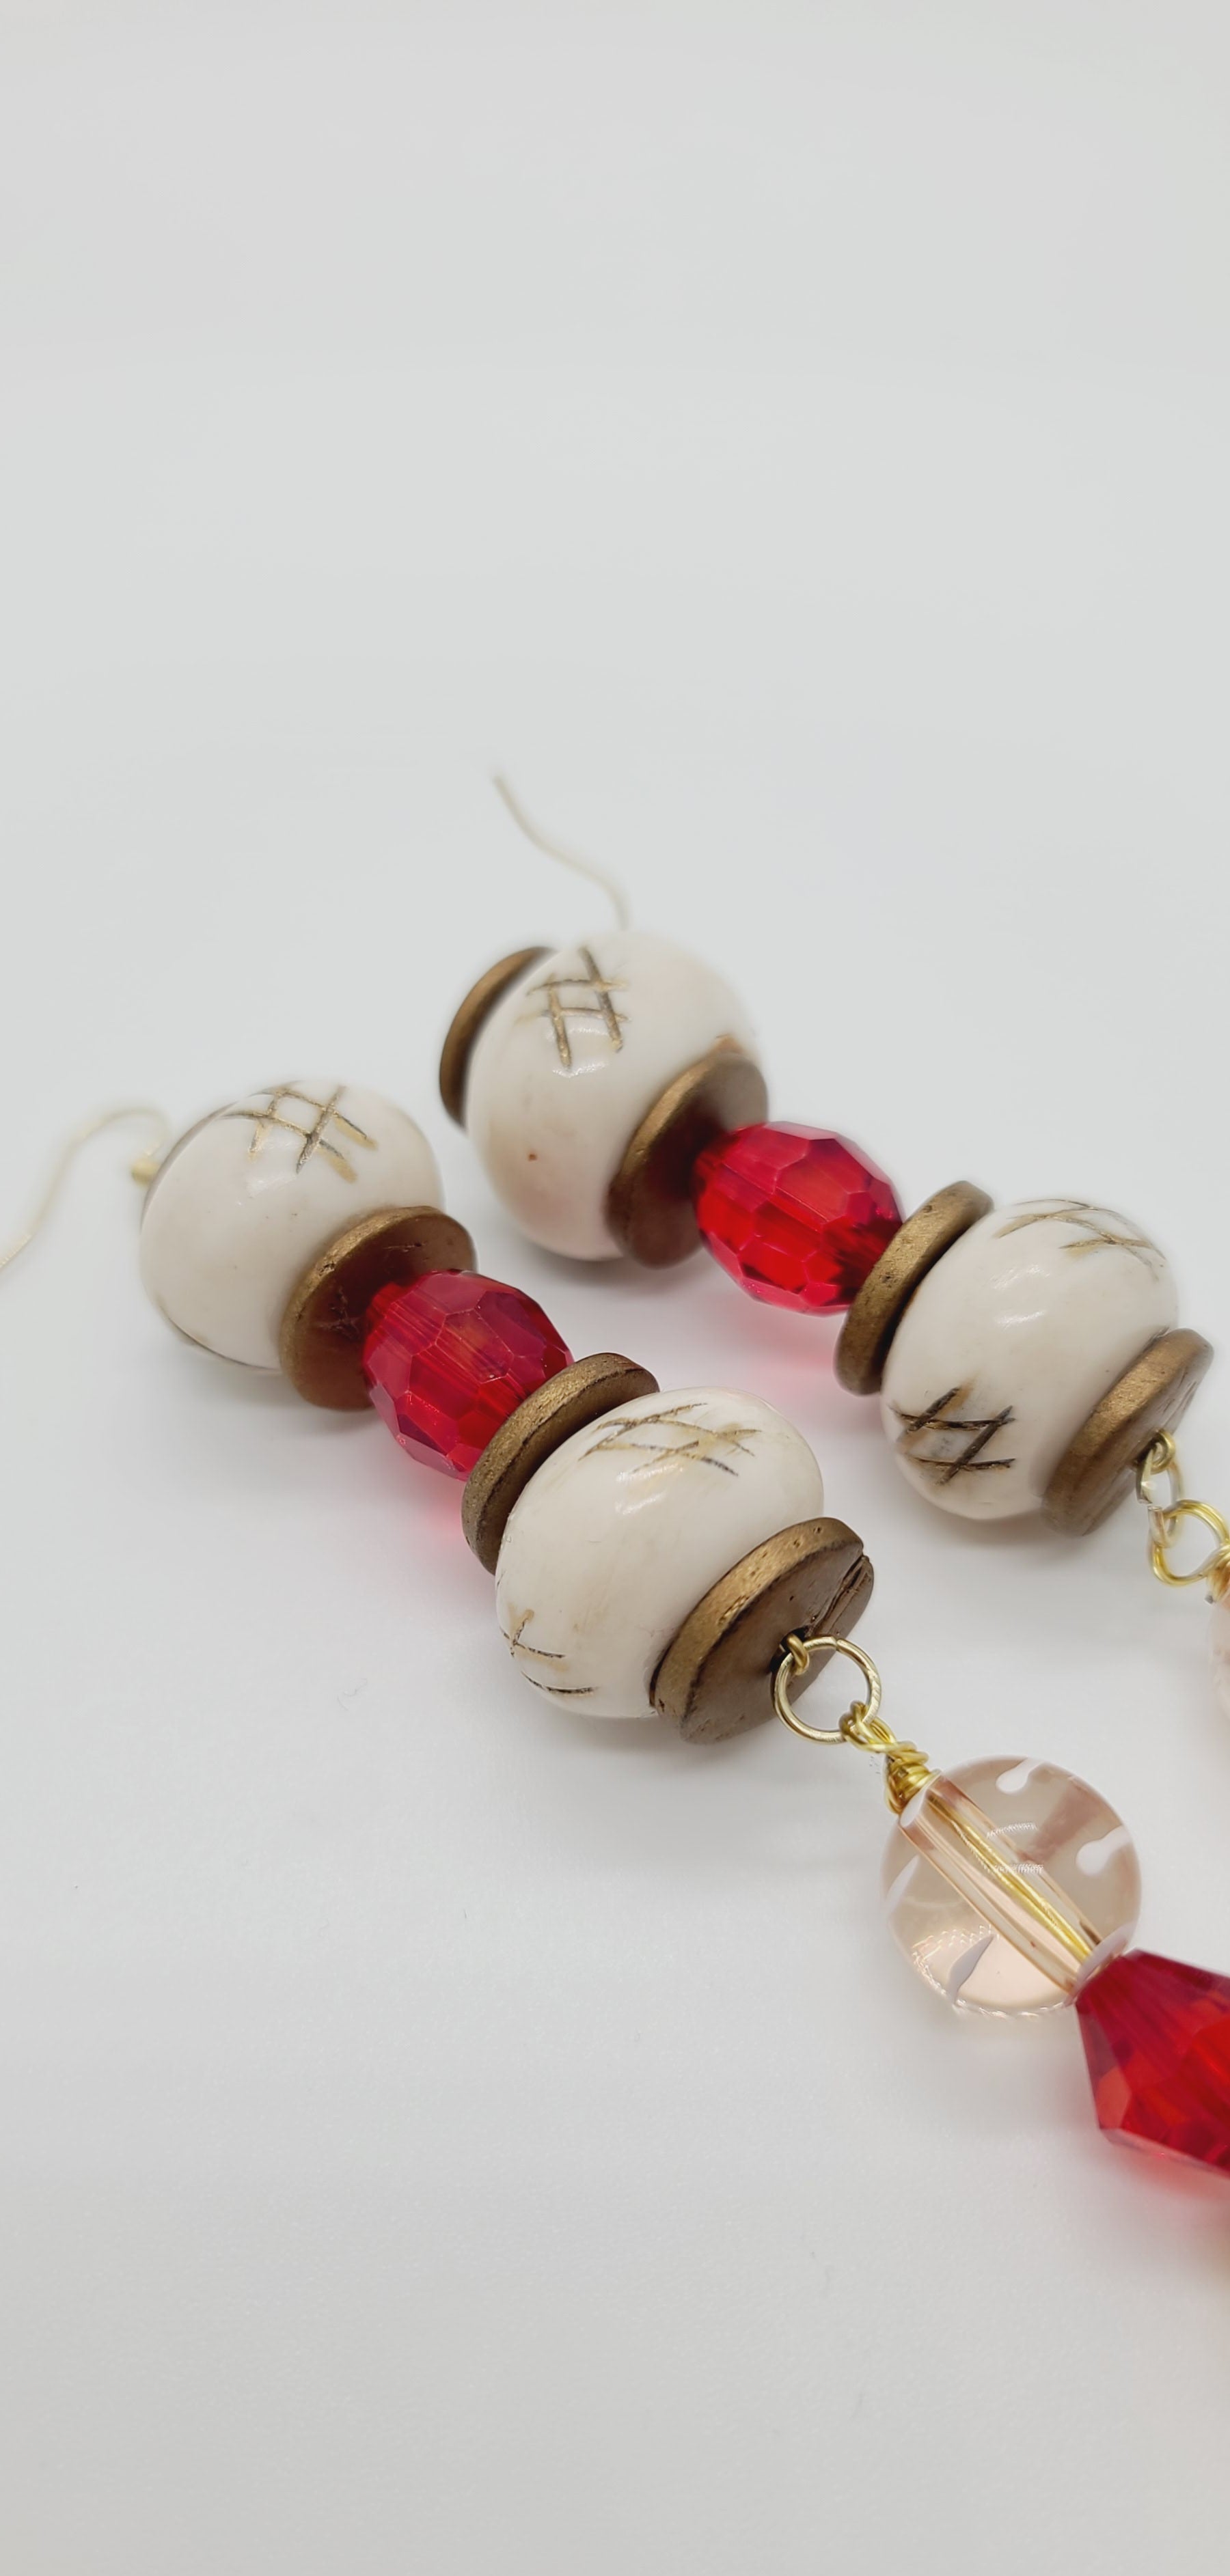 Length: 7 inches | Weight: 1.5 ounces  Distinctly You! These earrings are made with white checked Batik bone beads, gold resin rondelles, 12mm and 10mm red faceted resin beads, 12mm clear and white glass beads, 10mm clear gold emerald cut beads, 6mm copper beads, 8mm gold carved white beads, copper spacers, and 4mm red and tan beads.